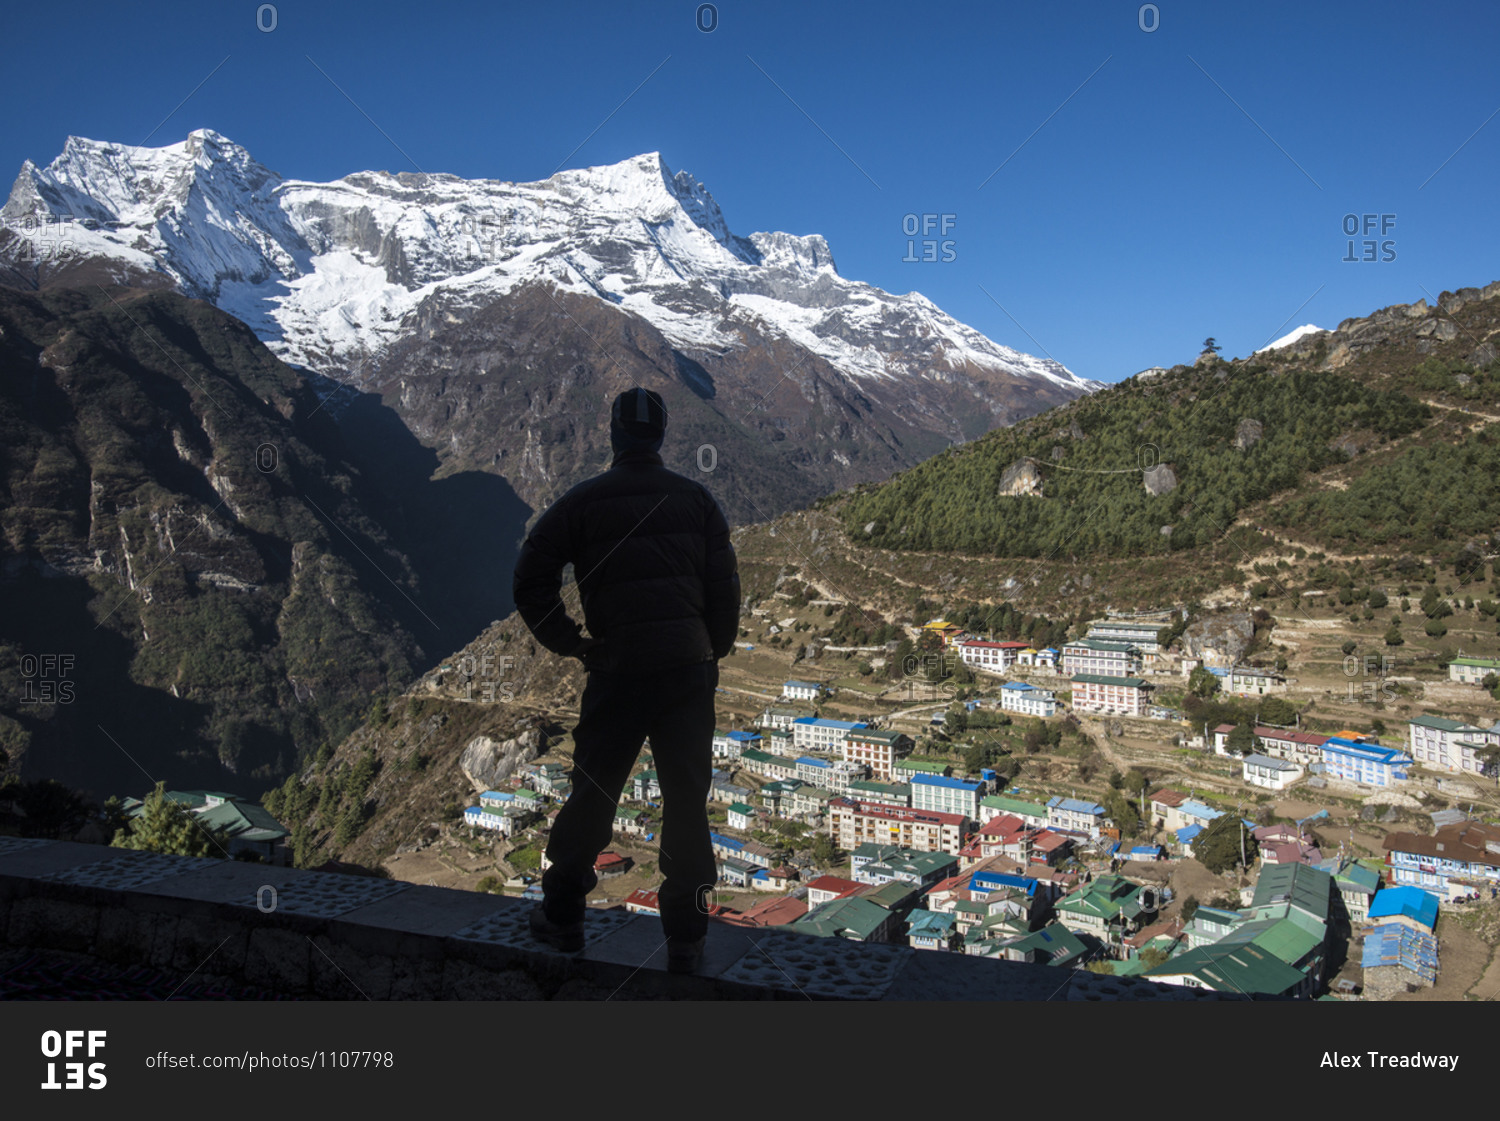 Namche is the main trading center and tourist hub for the Everest region seen here with  Kongde Ri peak a 6,187m mountain in the distance